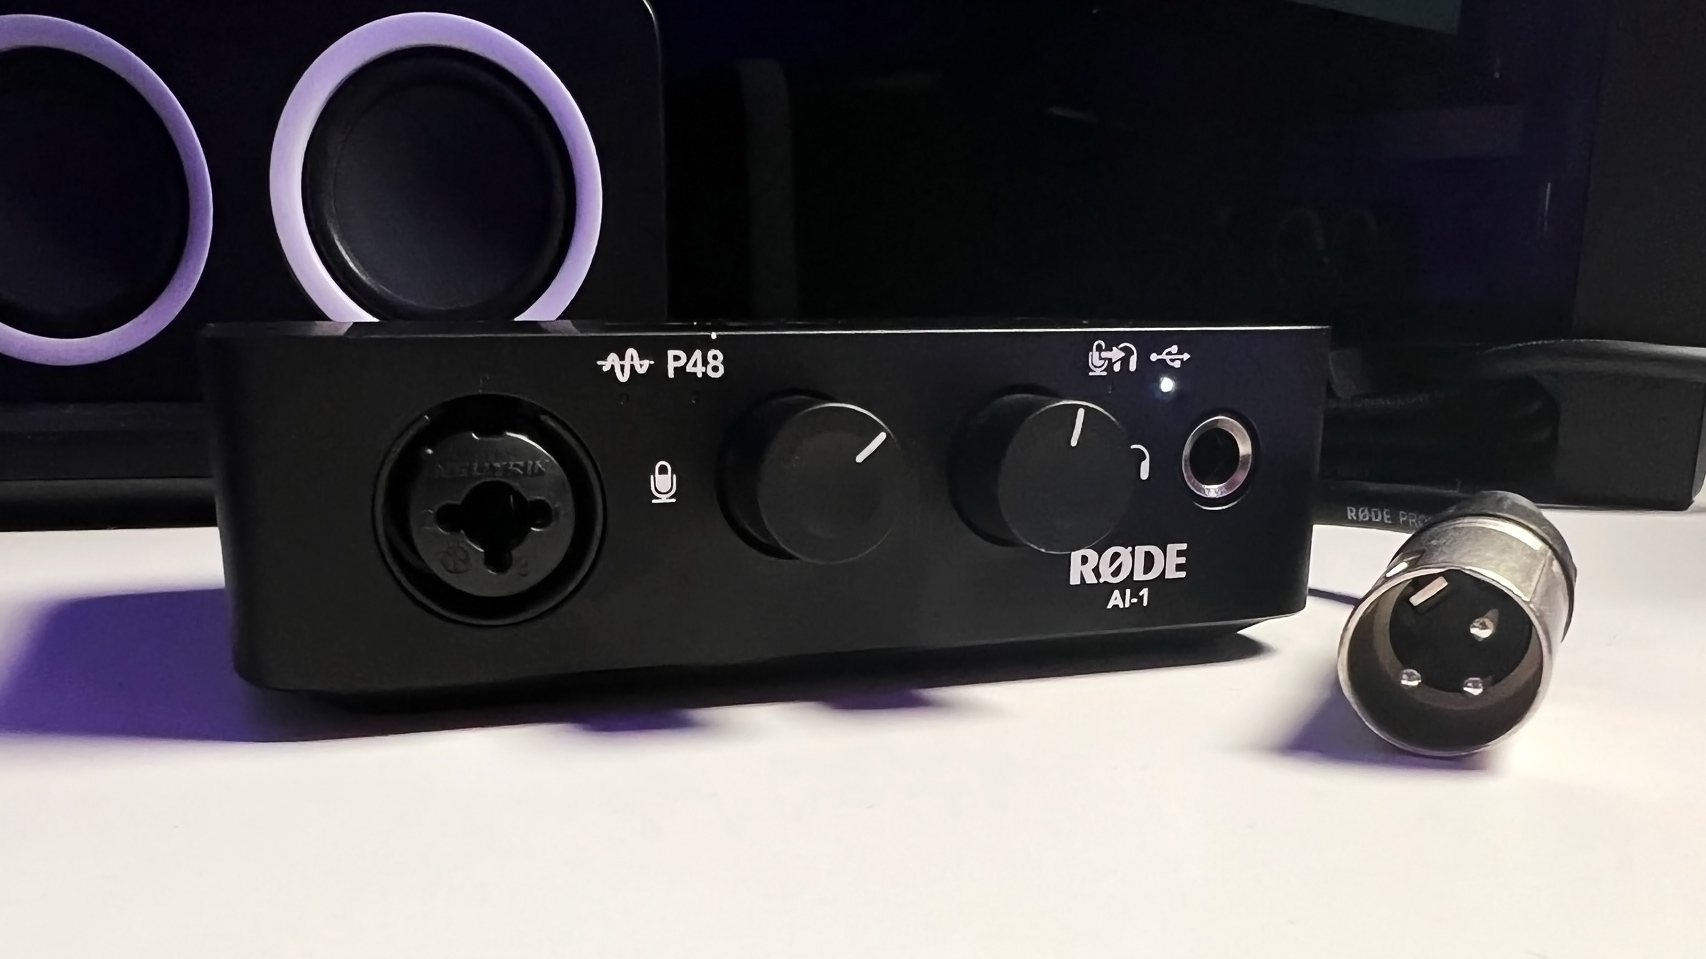 RODE AI-1 audio interface review: "A studio experience without hefty price tag" | GamesRadar+